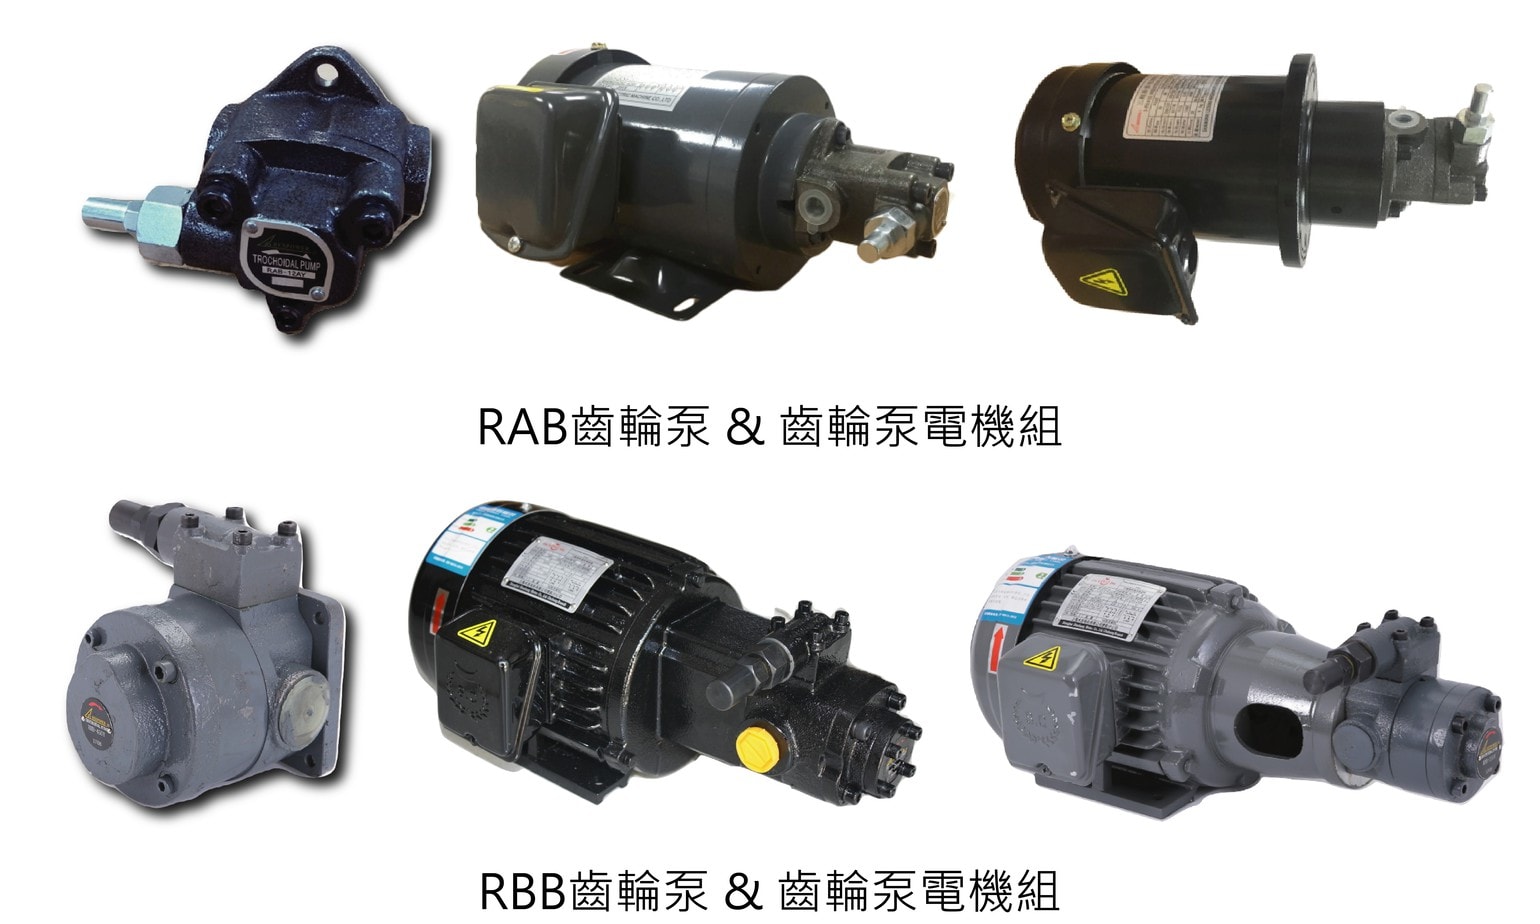 New Product Launch-RAB and RBB Series Gear Box Pump